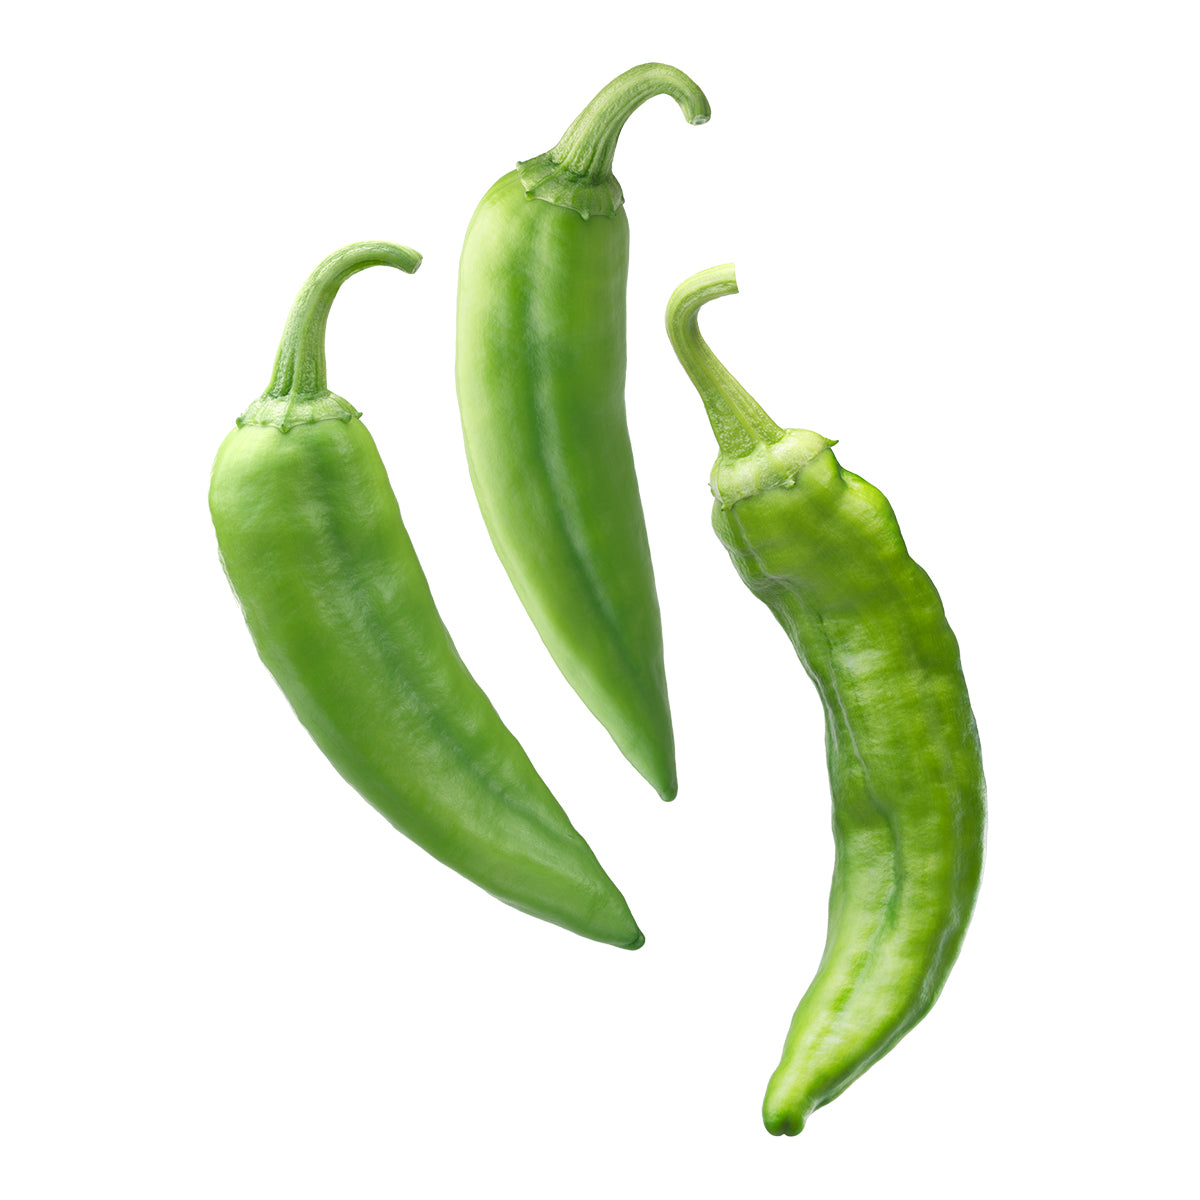 Fresh Hatch Green Chile Peppers (Medium) The Fresh Chile Co